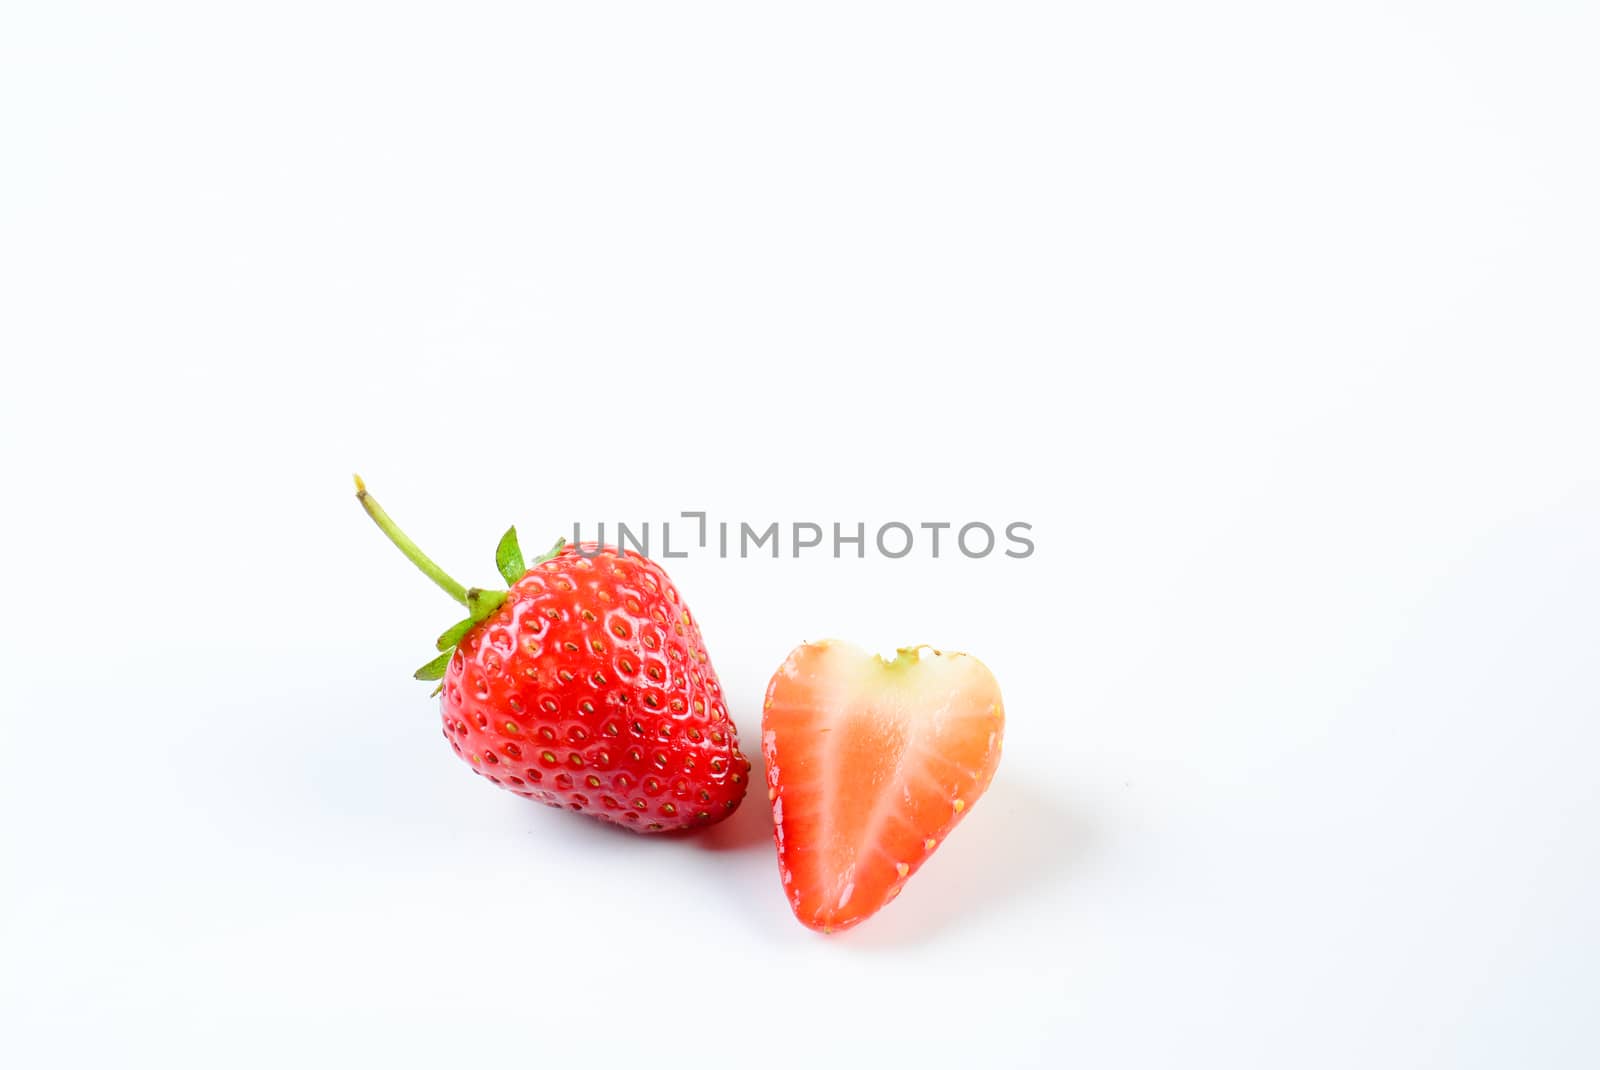 strawberries on white background by yuiyuize